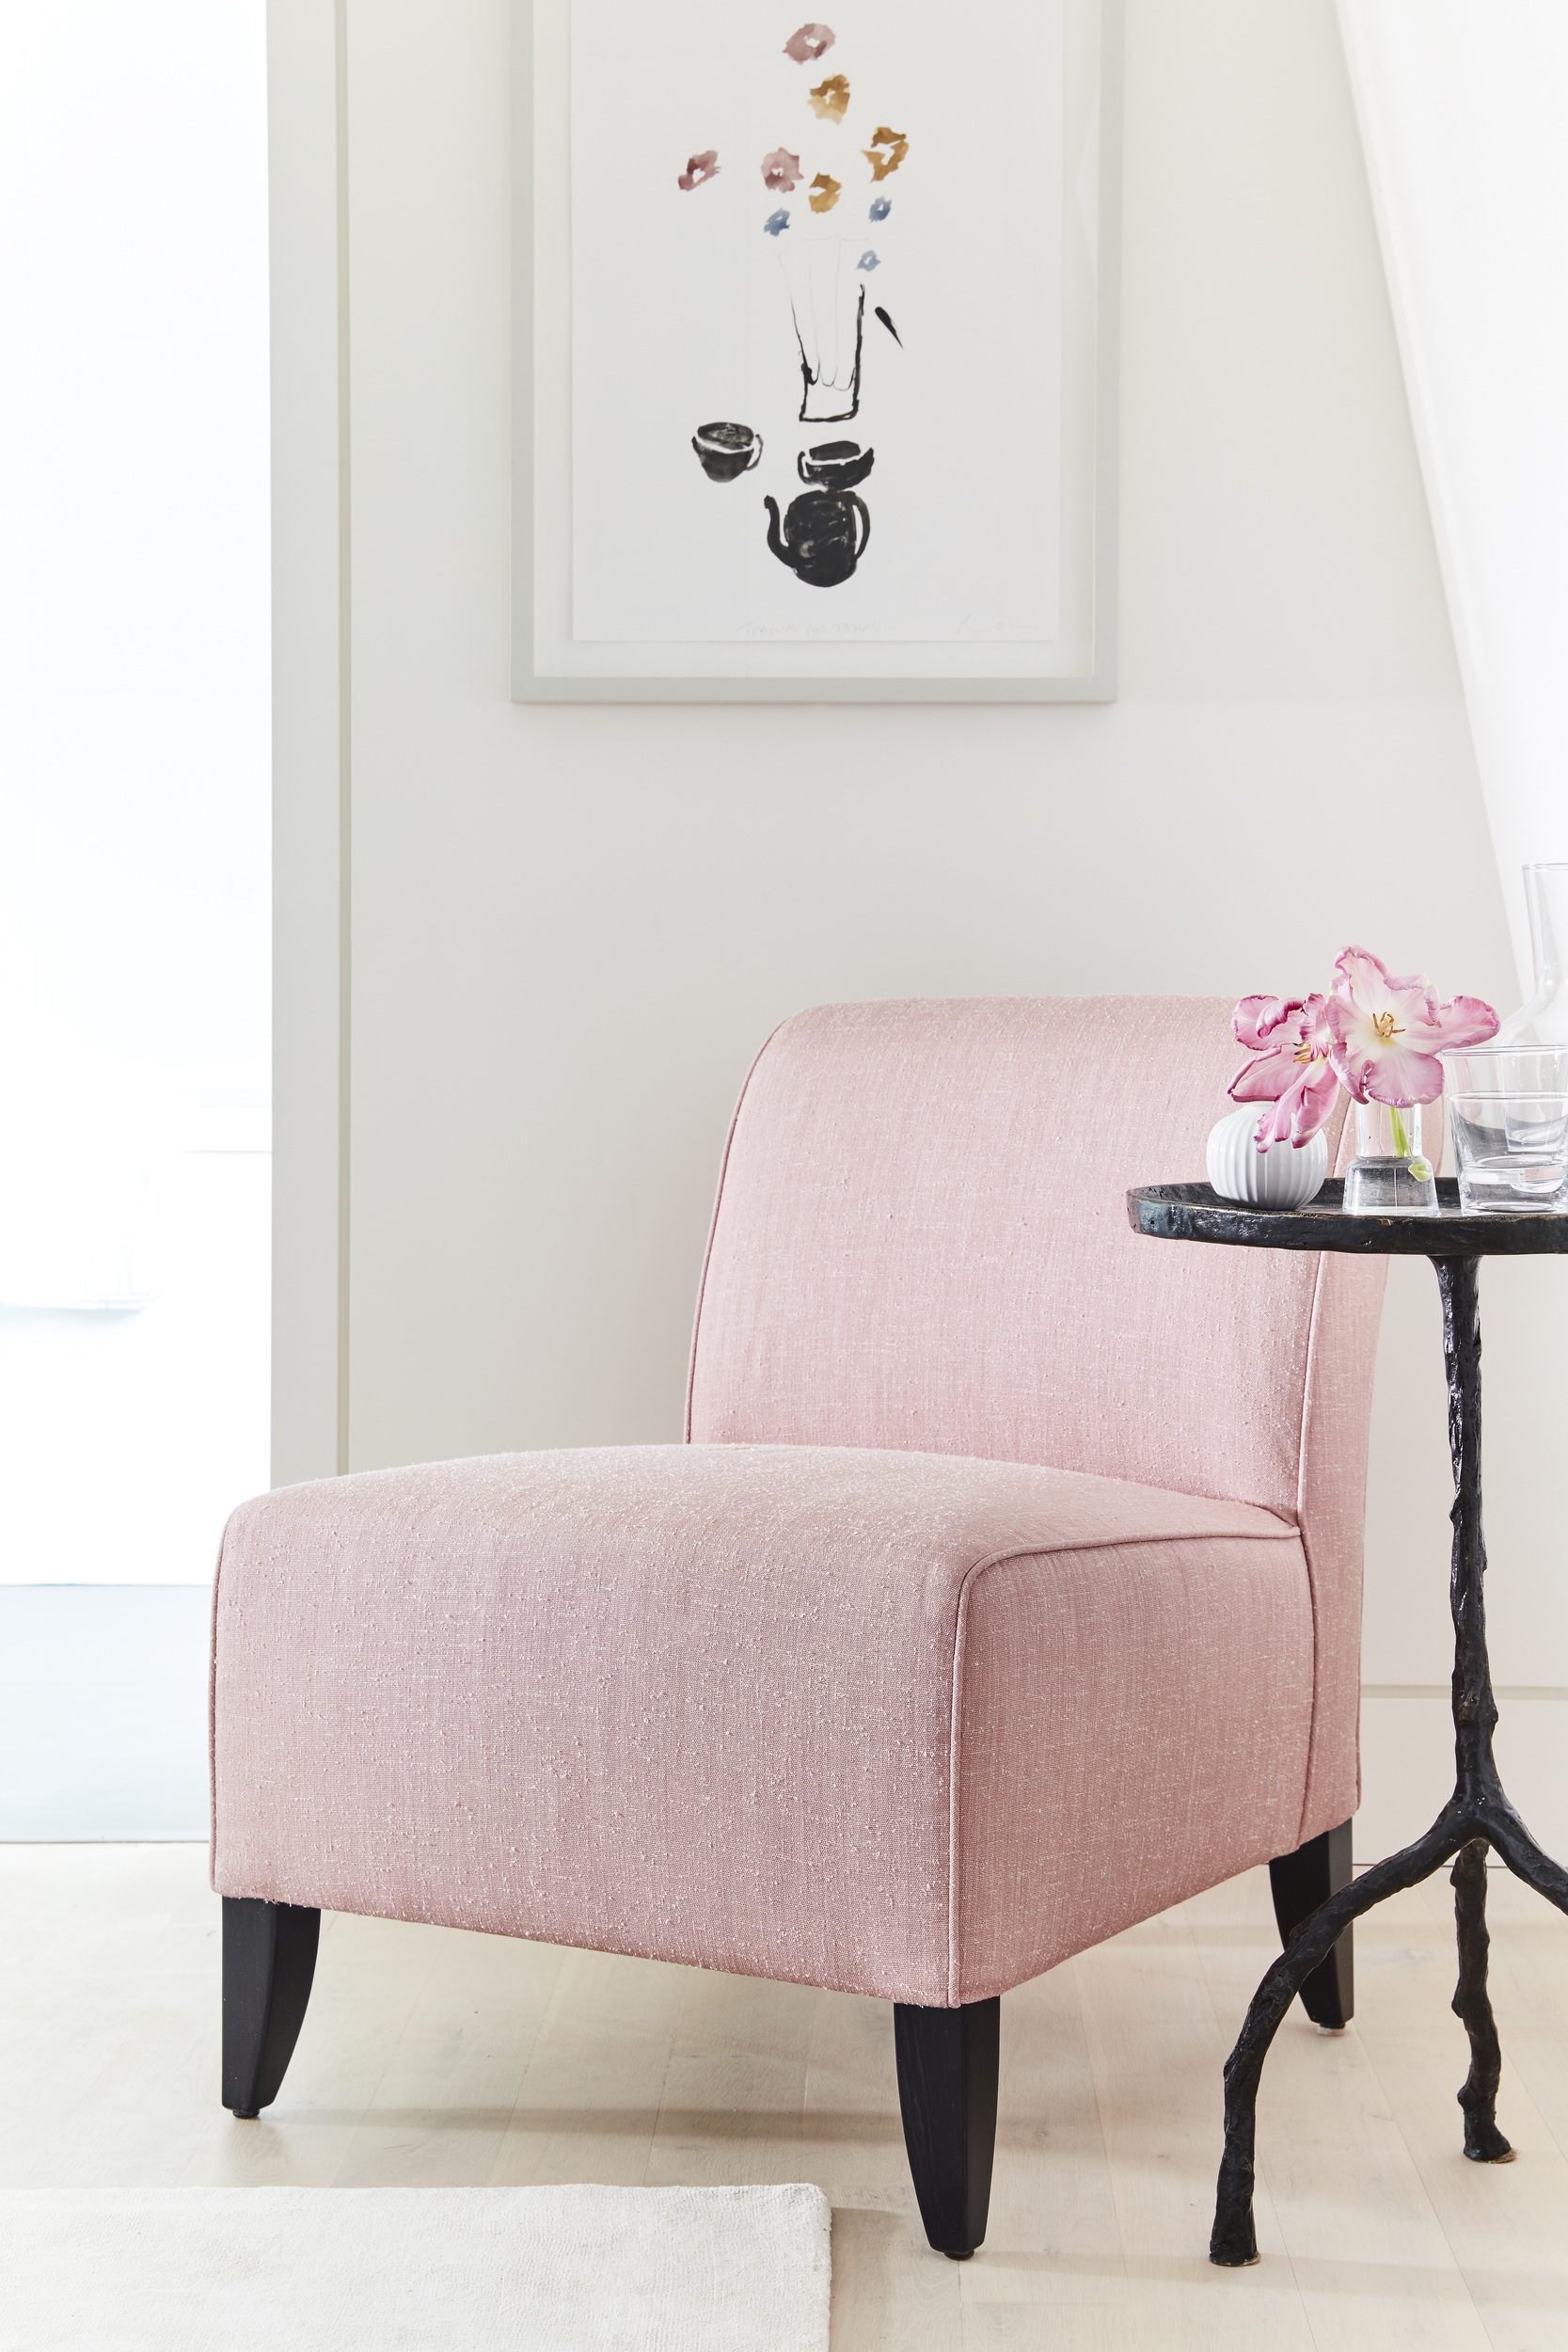 Pink chair with side table and artwork